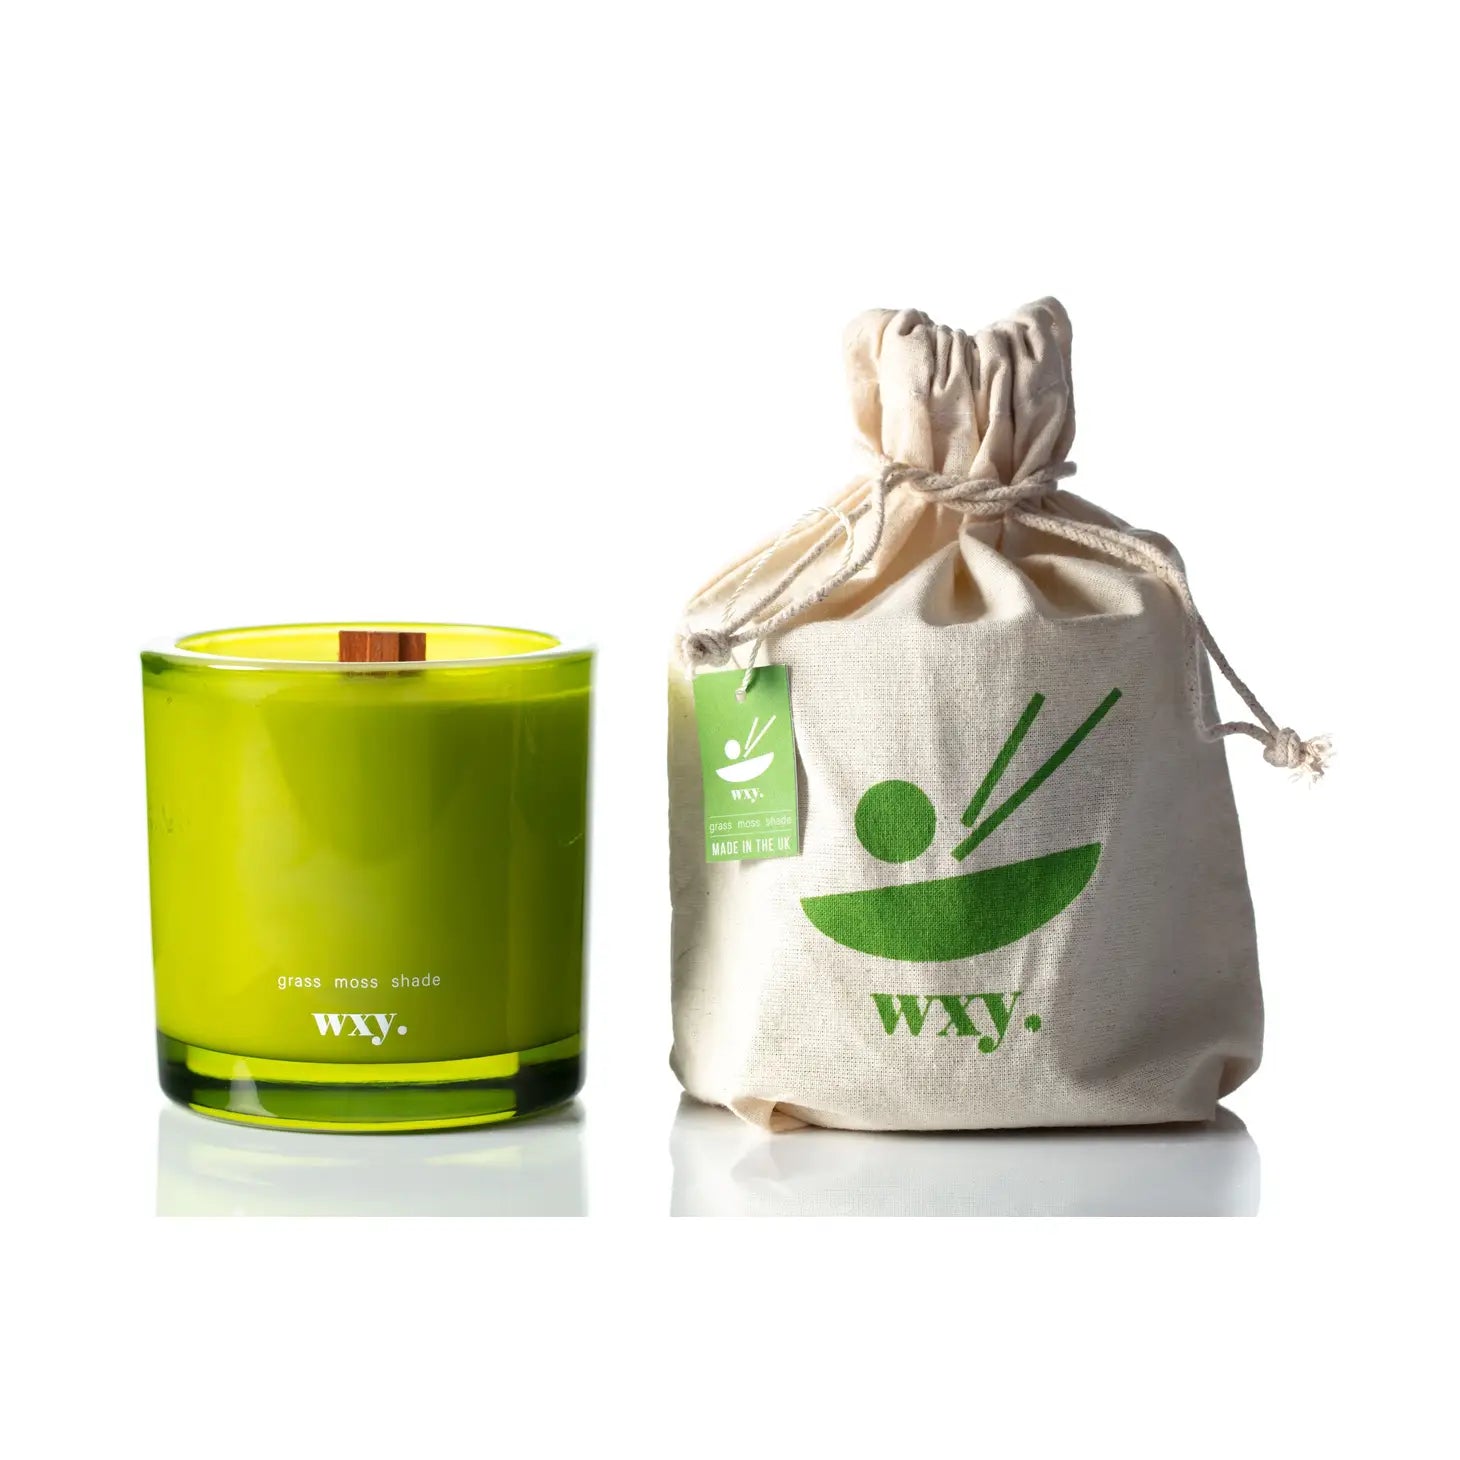 oam by wxy. - 12.5oz Candle - Grass Moss Shade. With Bag